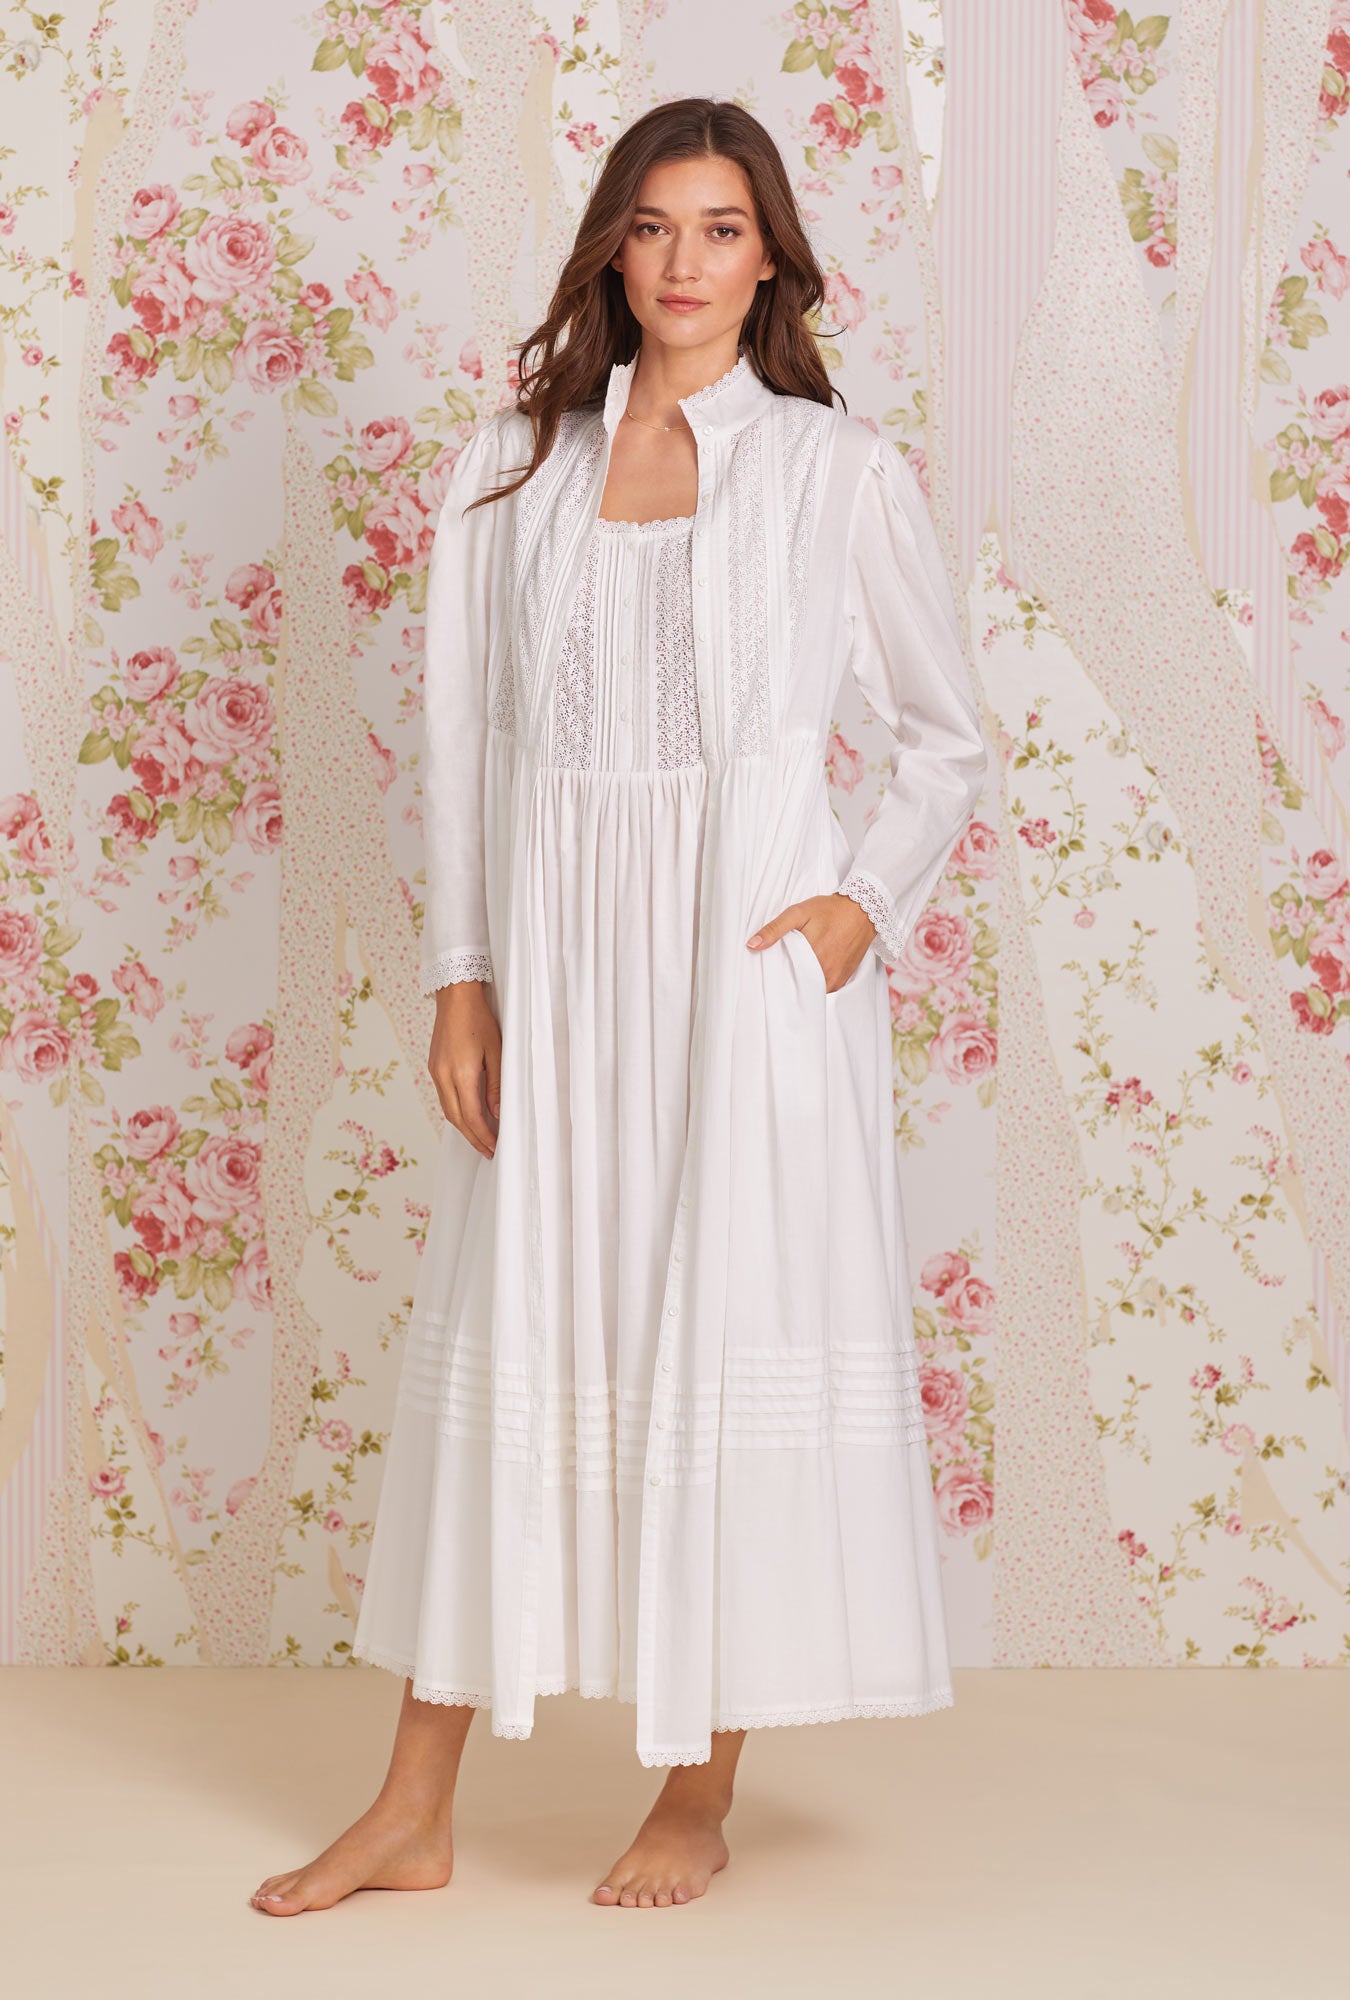 Eileen West  Sleepwear, Intimate Apparel, Dresses, Products for Home